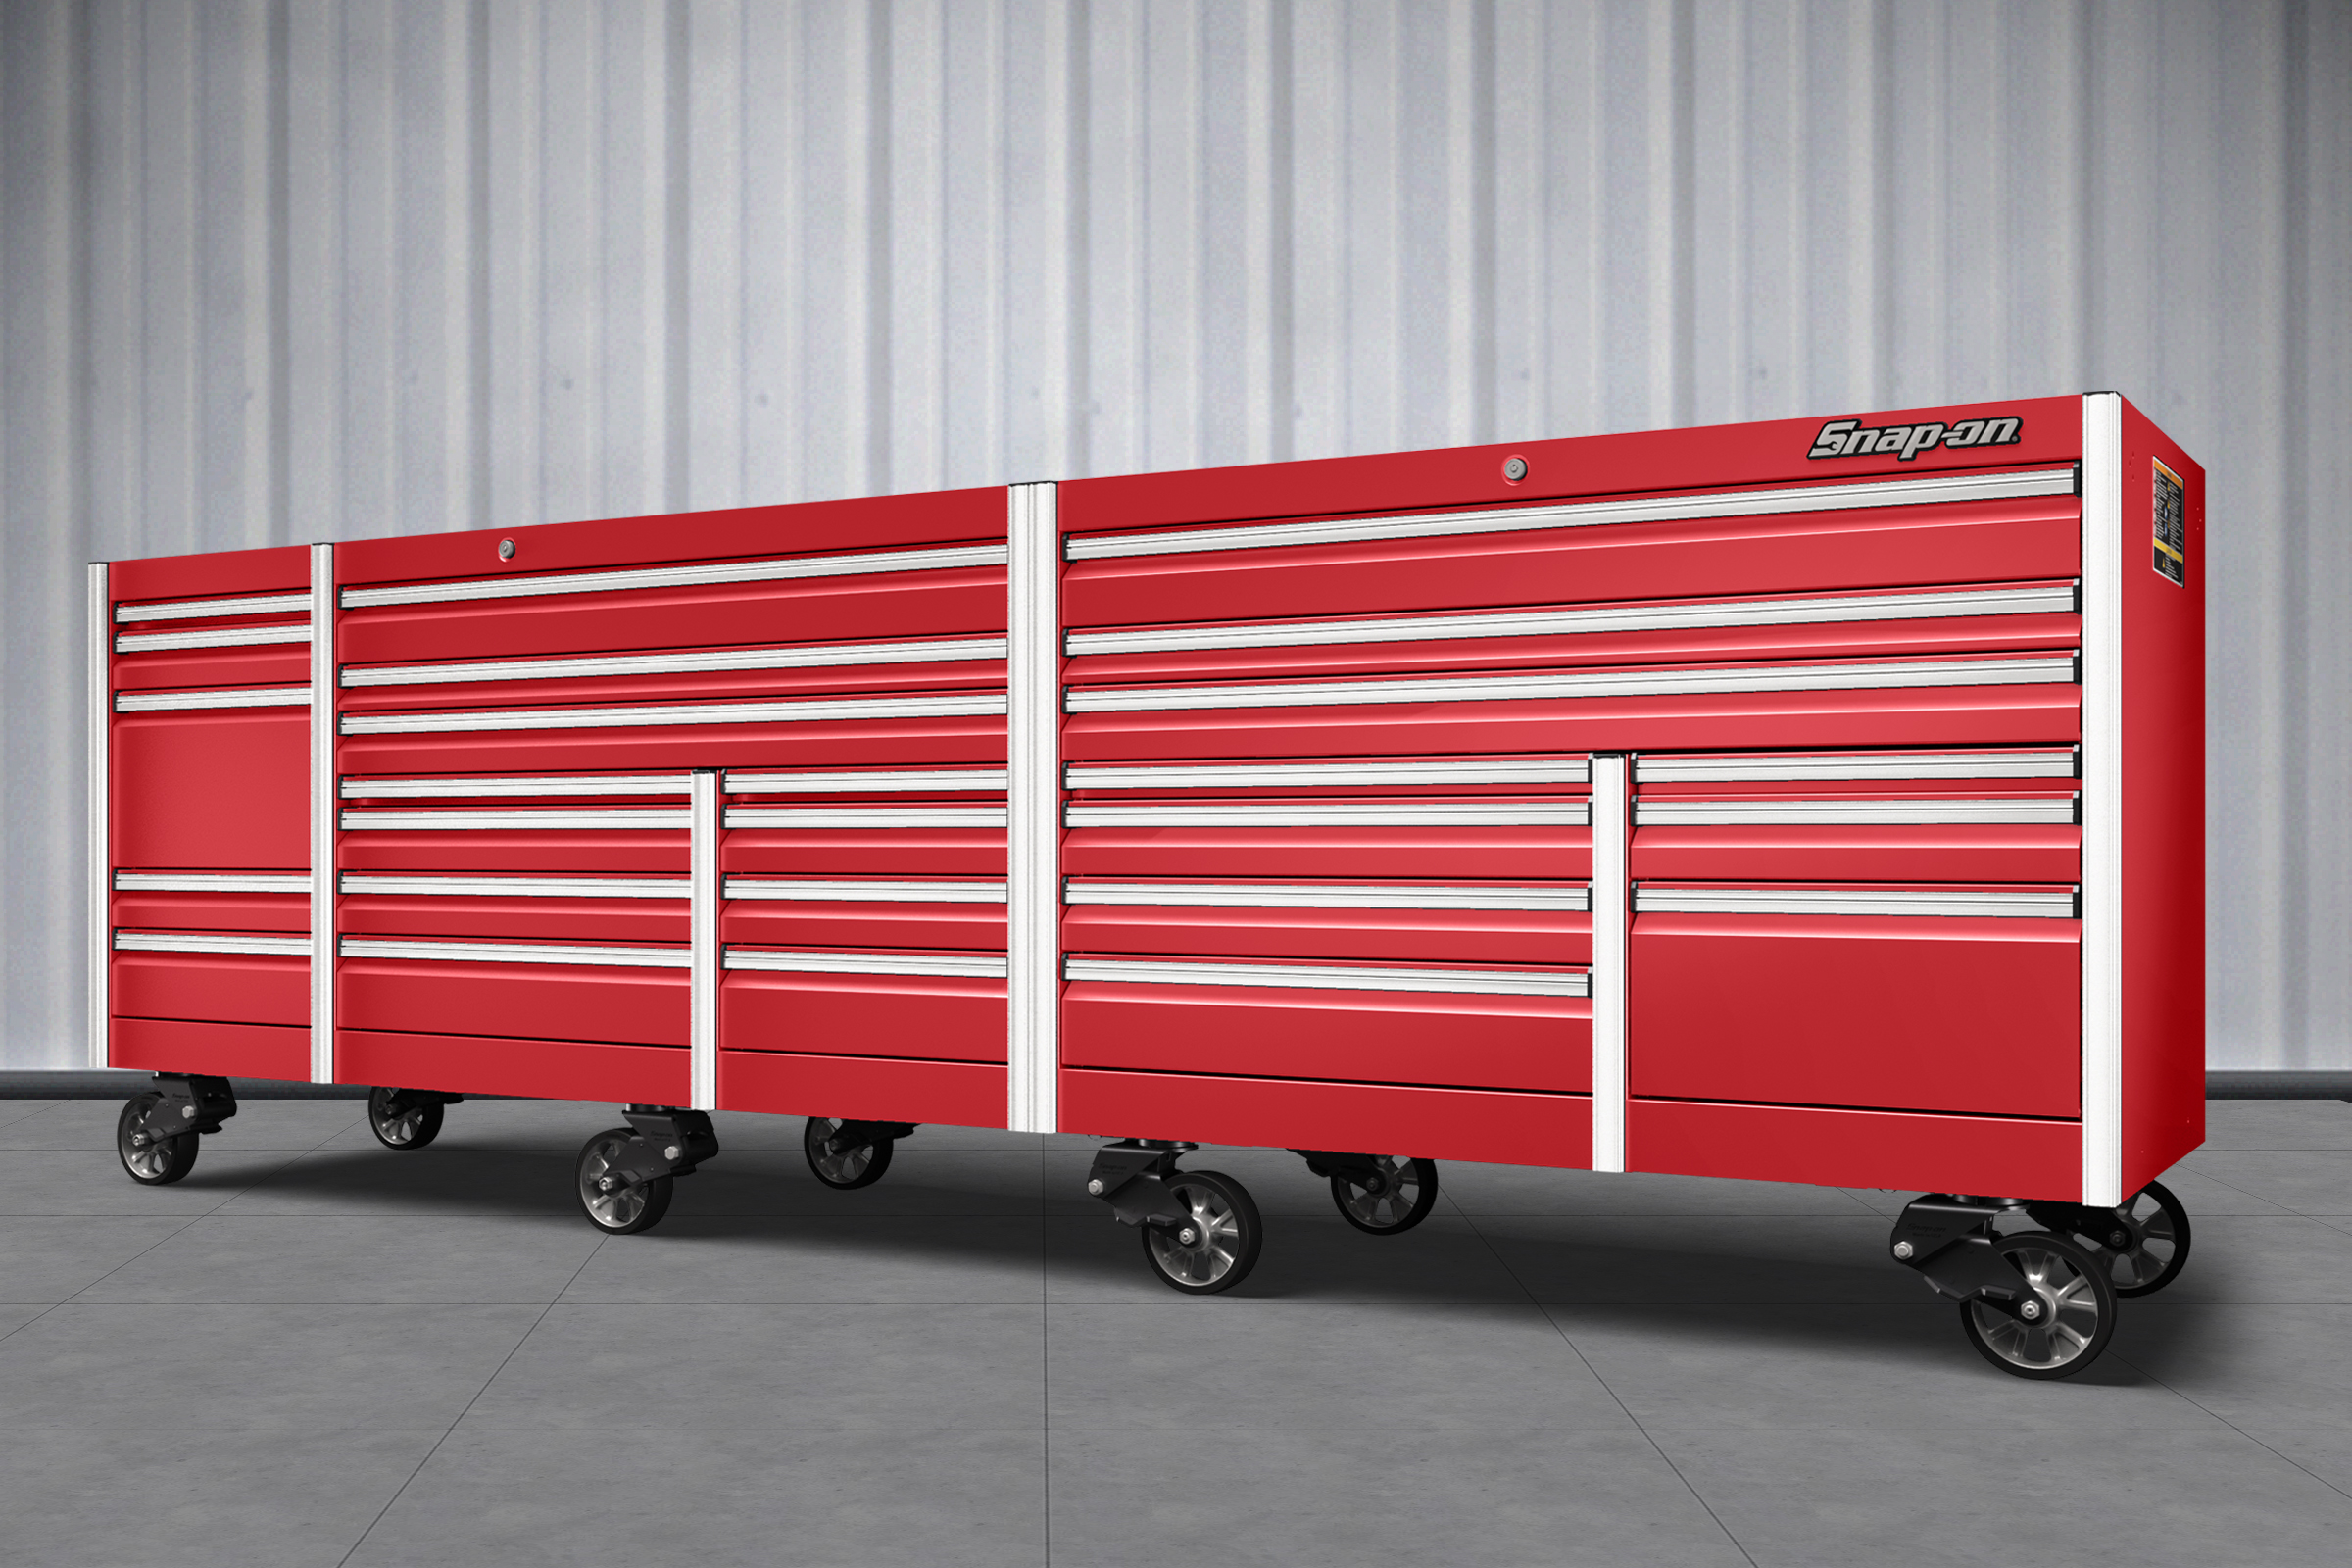 Who Makes Snap On Tool Boxes